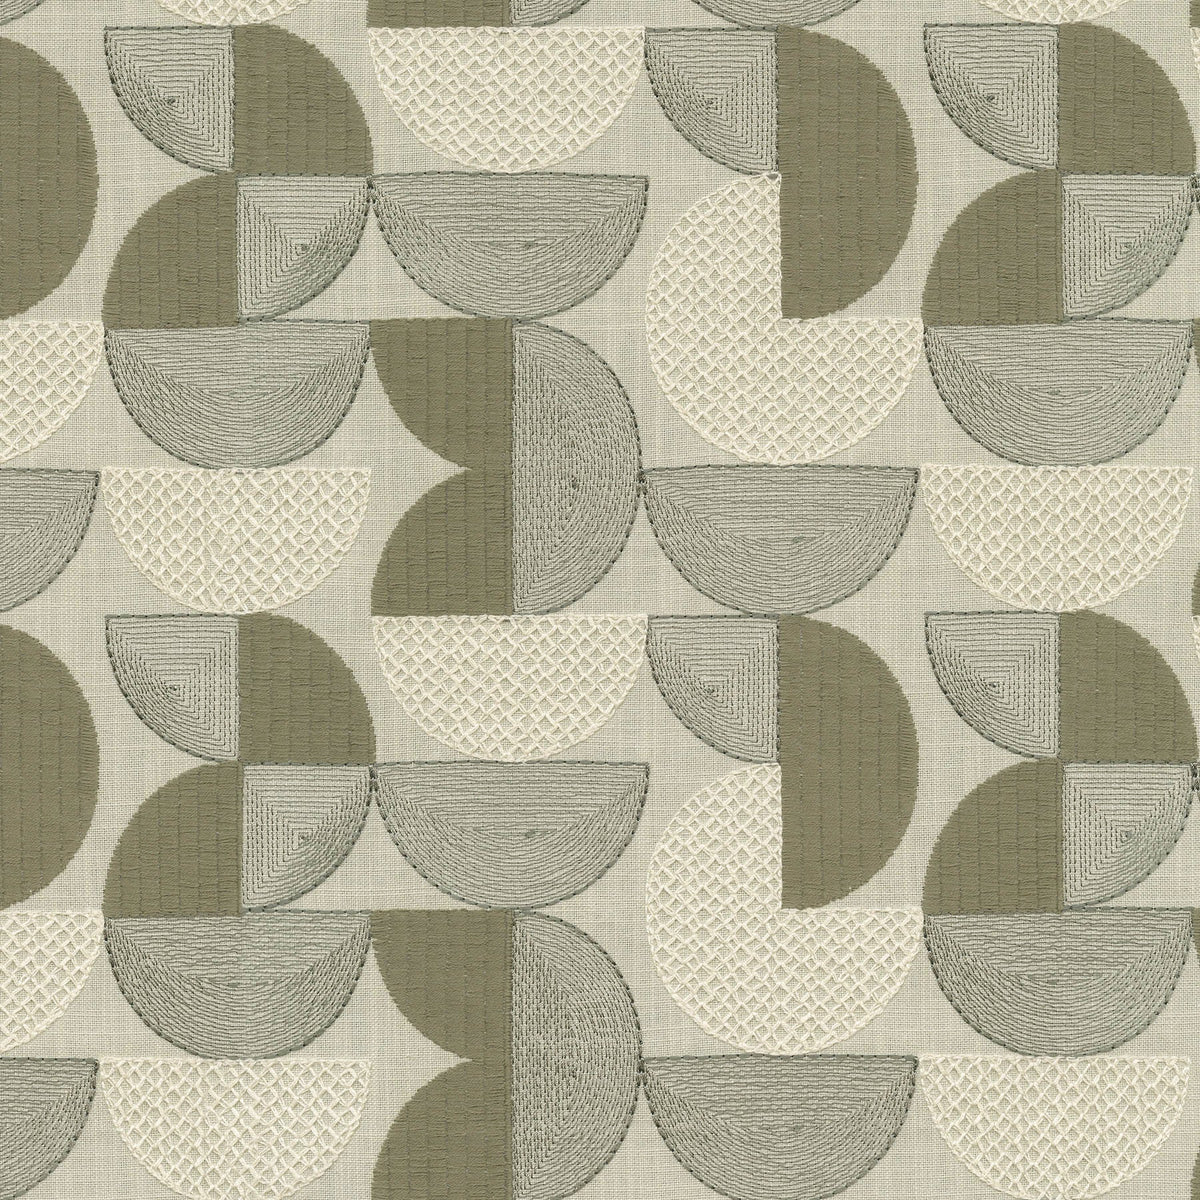 P/K Lifestyles Sector Emb - Shale 411962 Fabric Swatch